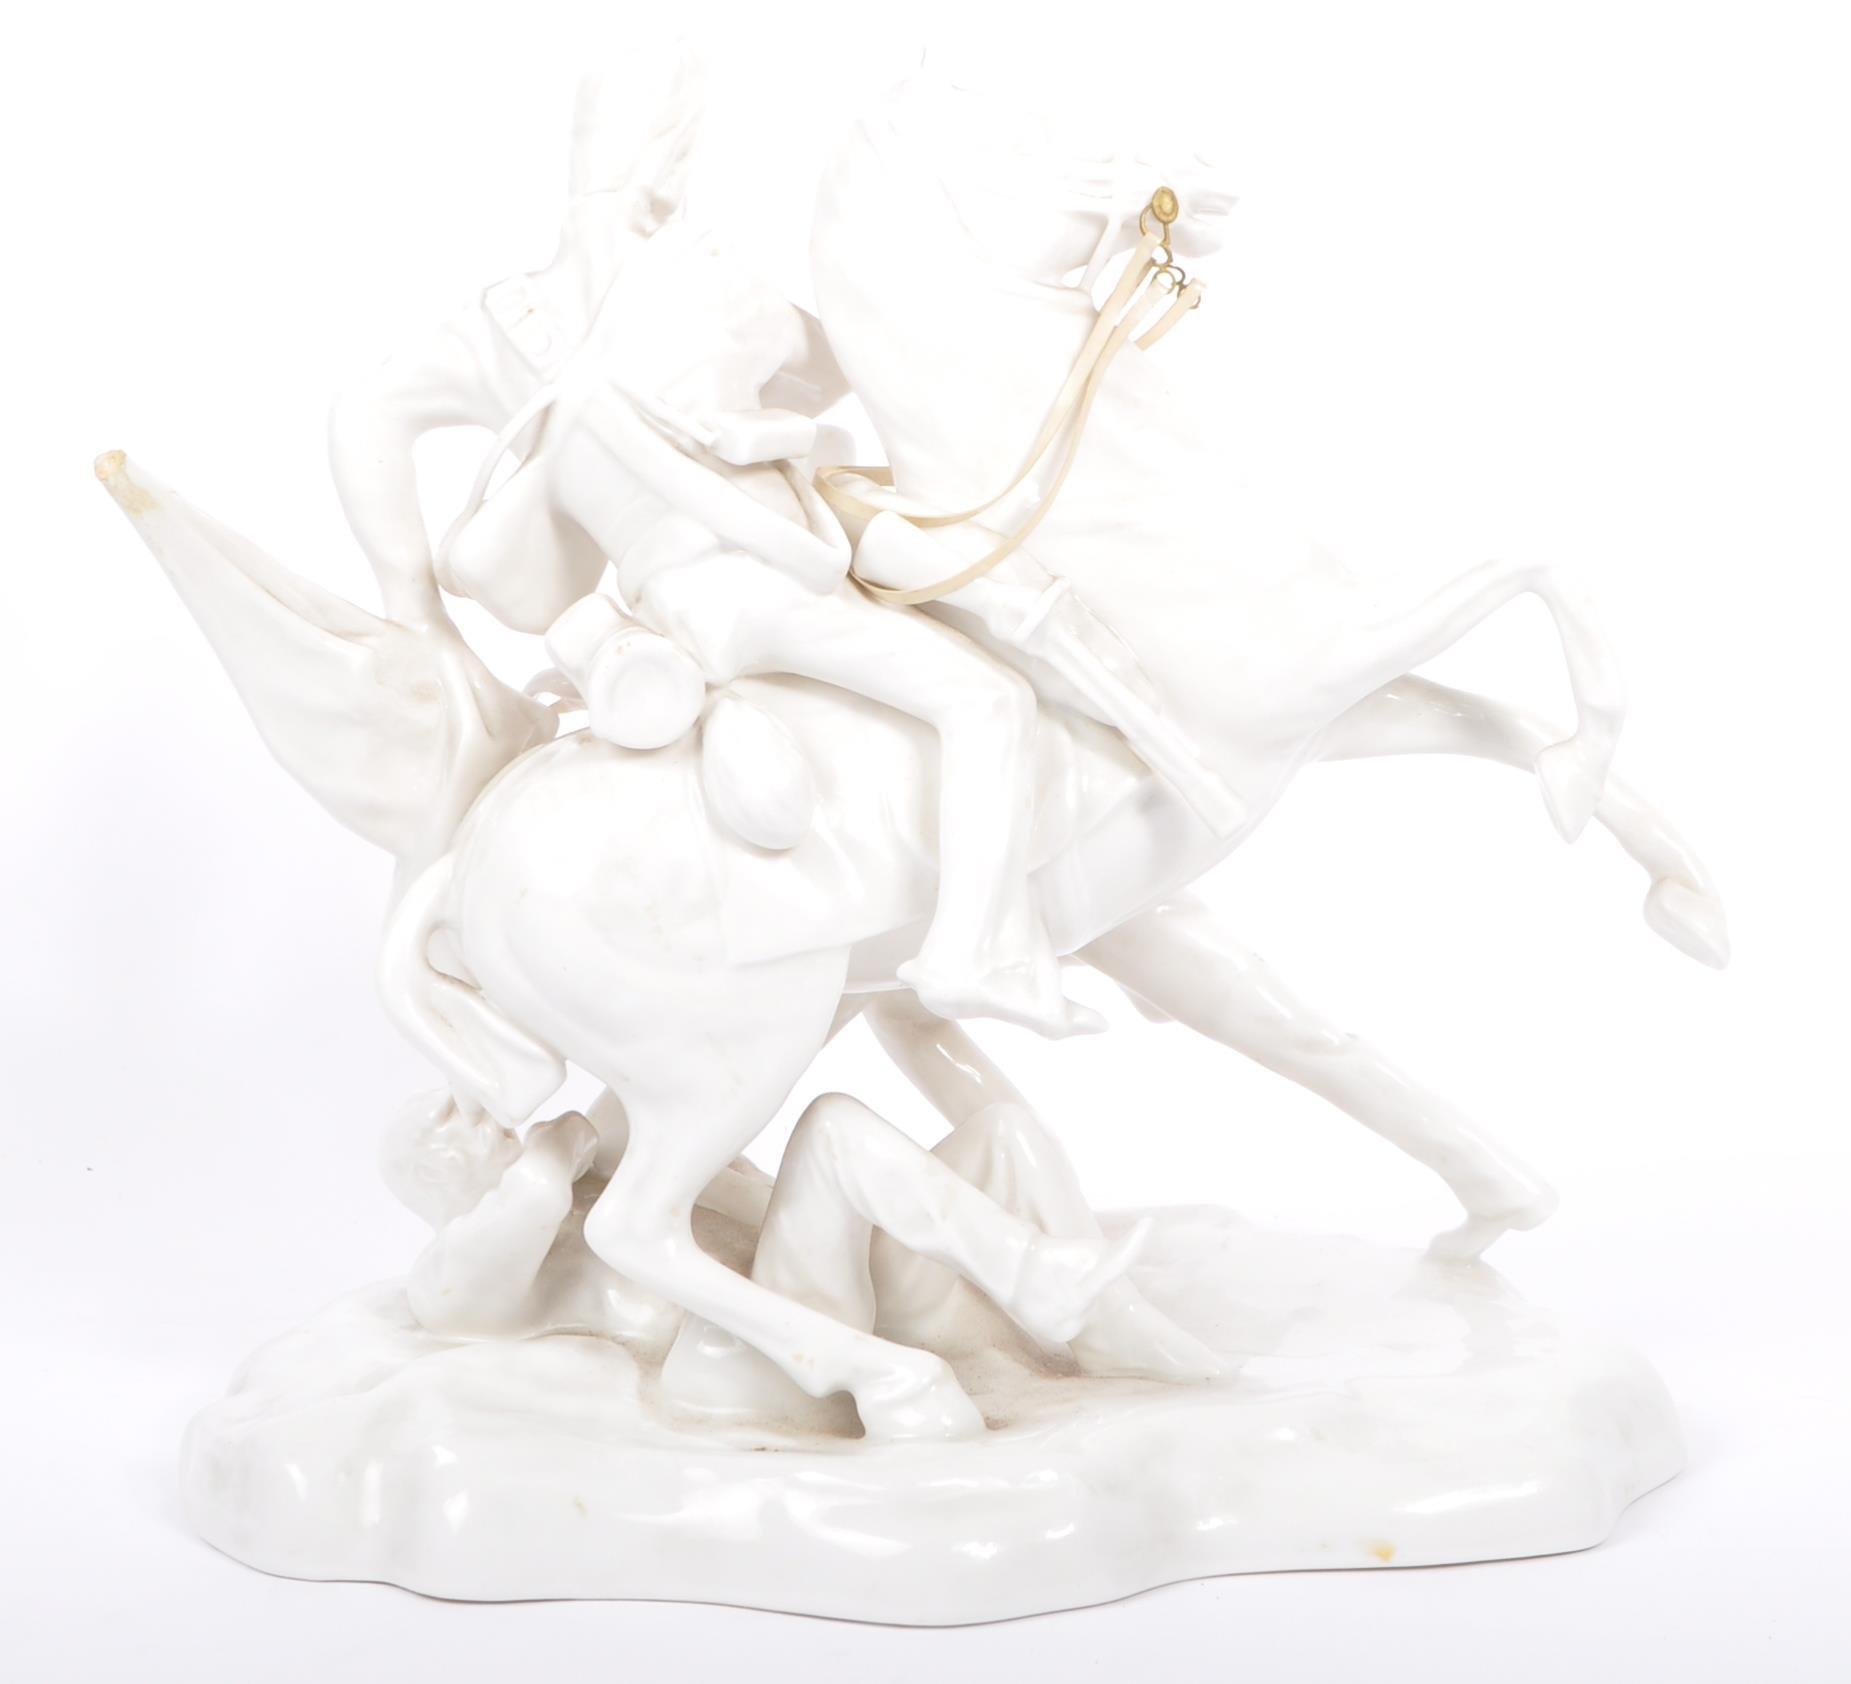 MICHAEL SUTTY PORCELAIN MILITARY FIGURE - FACTORY PROTOTYPE - Image 4 of 5